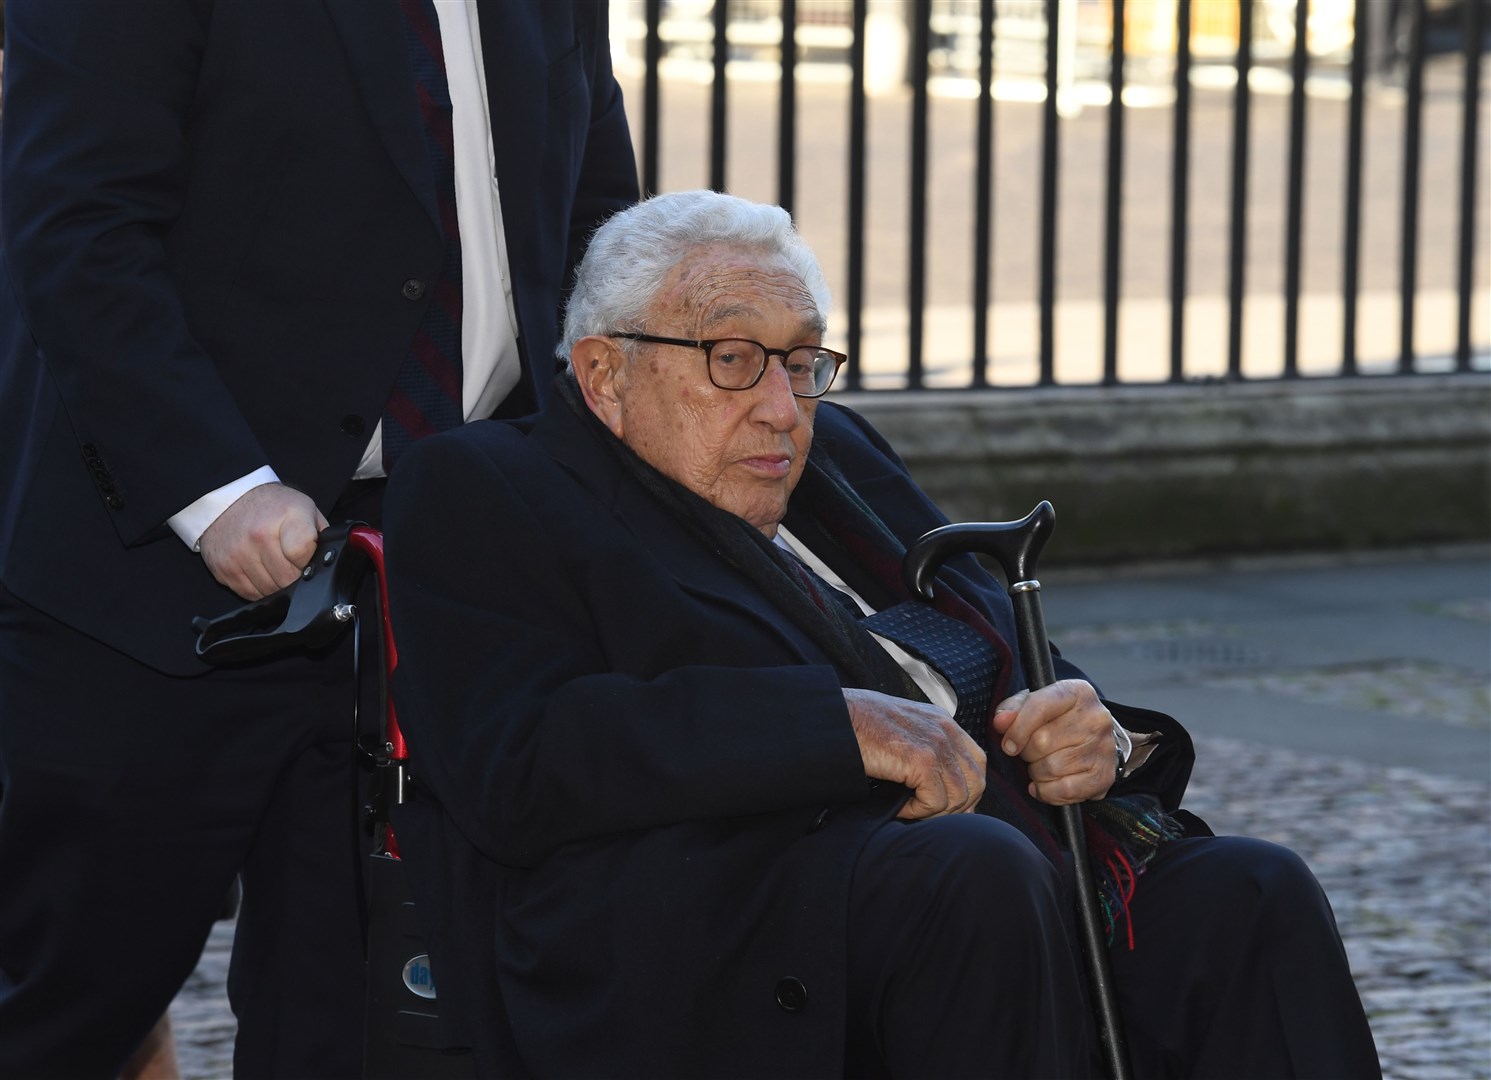 Henry Kissinger attended a service of thanksgiving for ex-foreign secretary Lord Carrington in London in 2019 (Stefan Rousseau/PA)